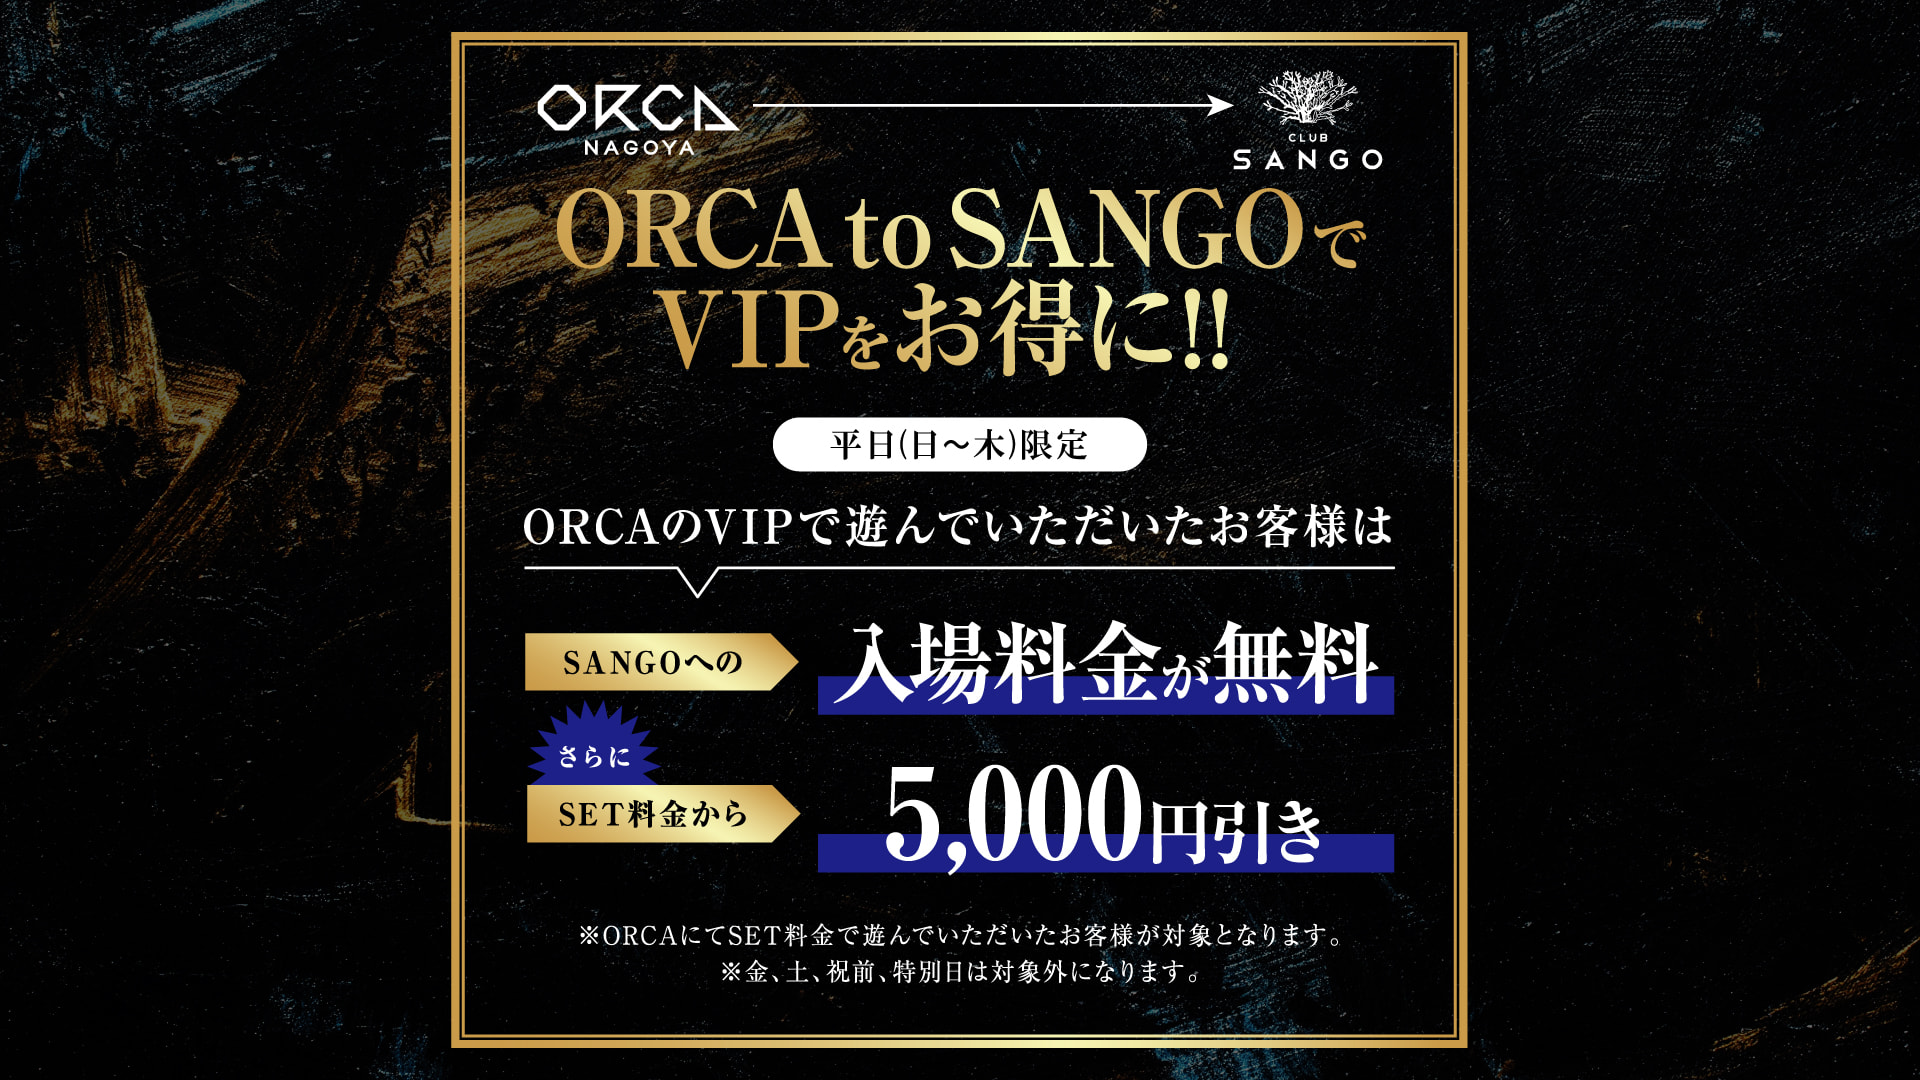 ORCA to SANGOでVIPをお得に！！（平日限定）